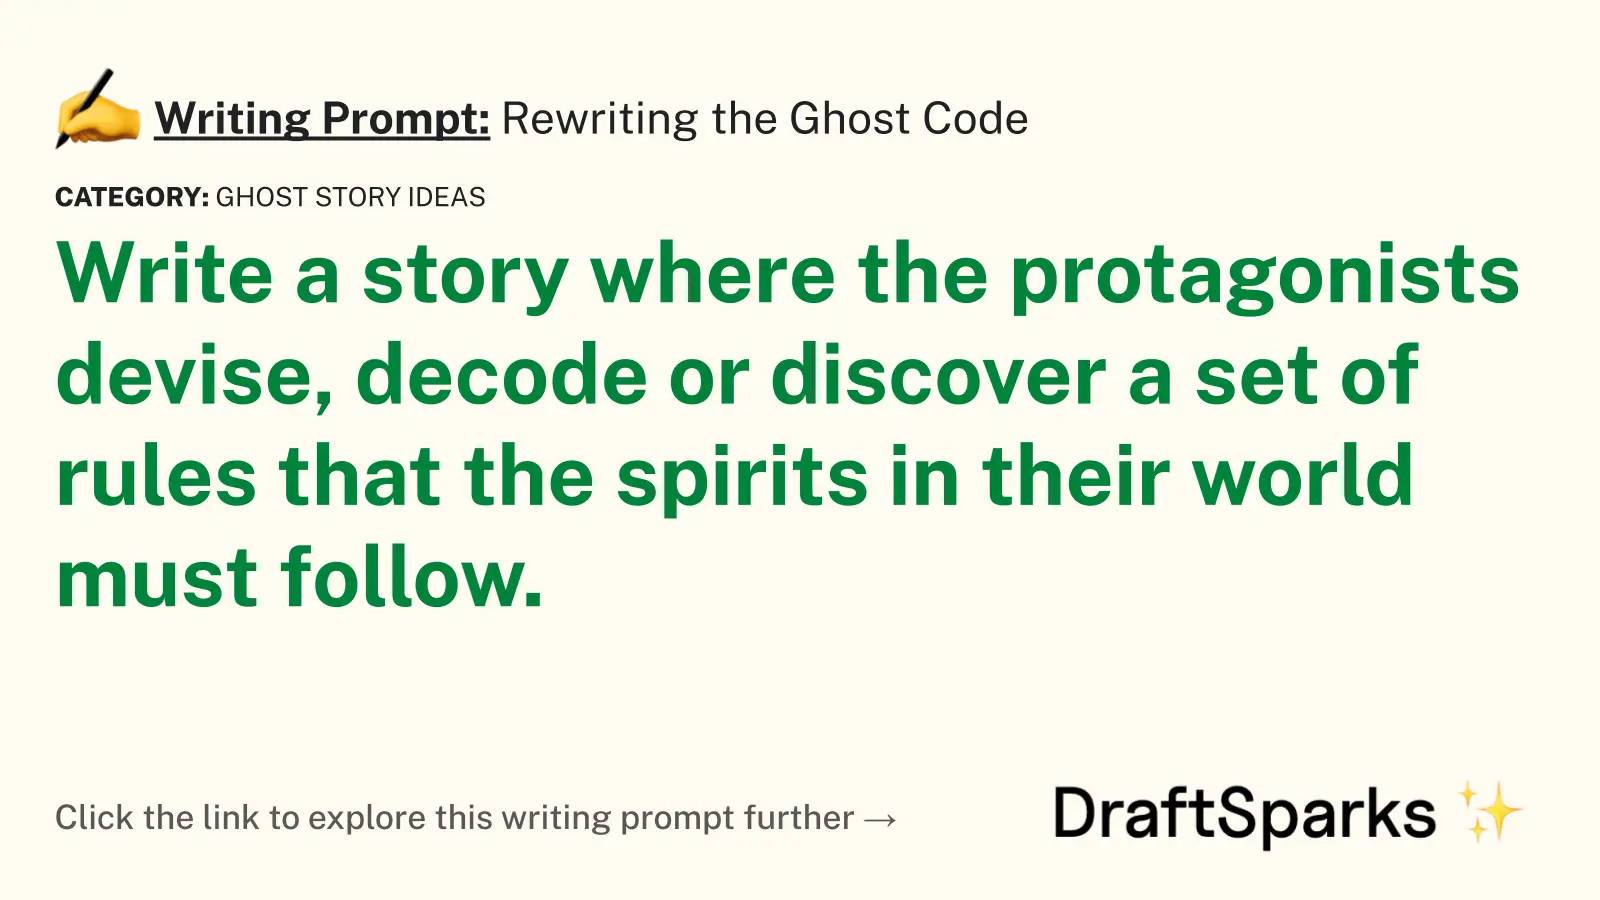 Rewriting the Ghost Code